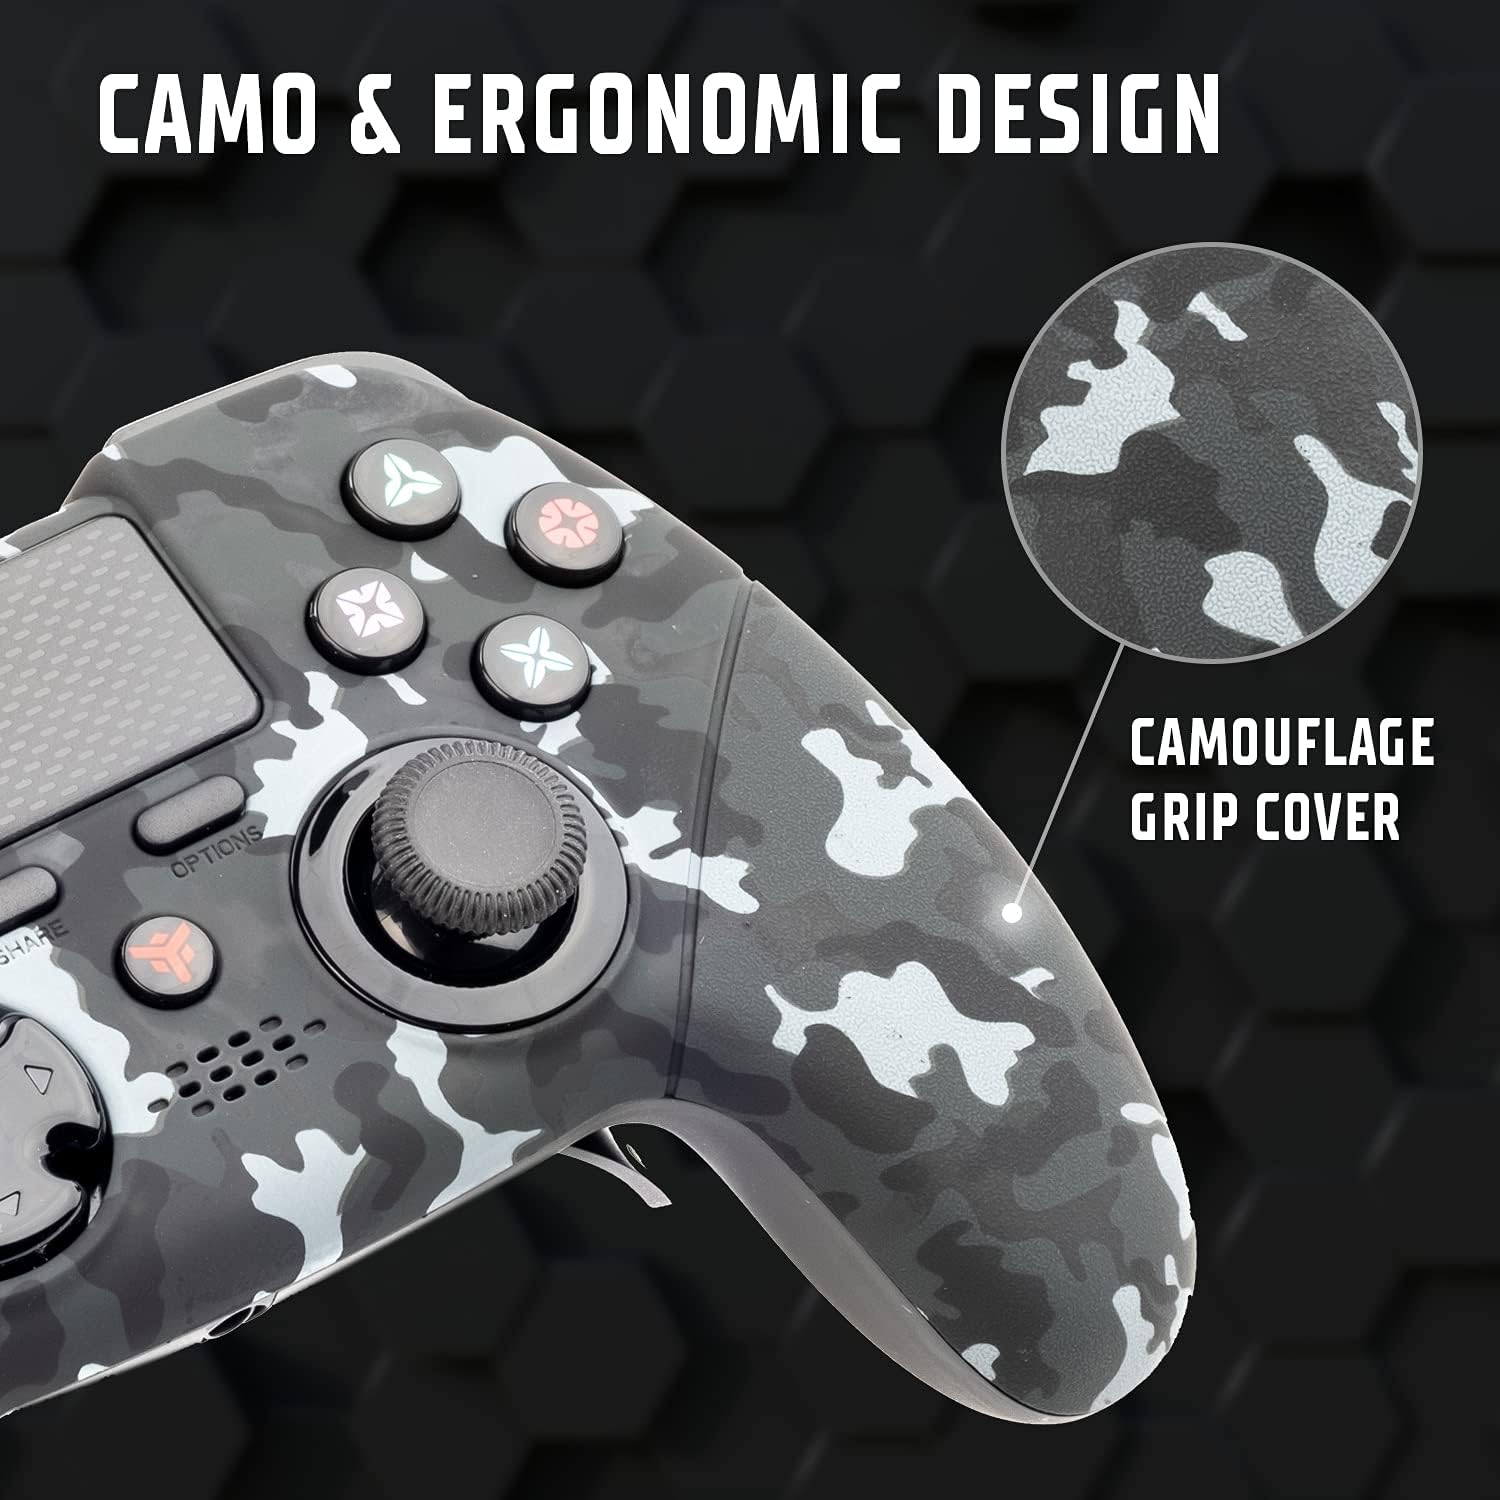 GAMEPAD CONTROLLER PC, PS4, Bluetooth, DualShock, Progr Keys, TouchPad Axis6, CAMO 